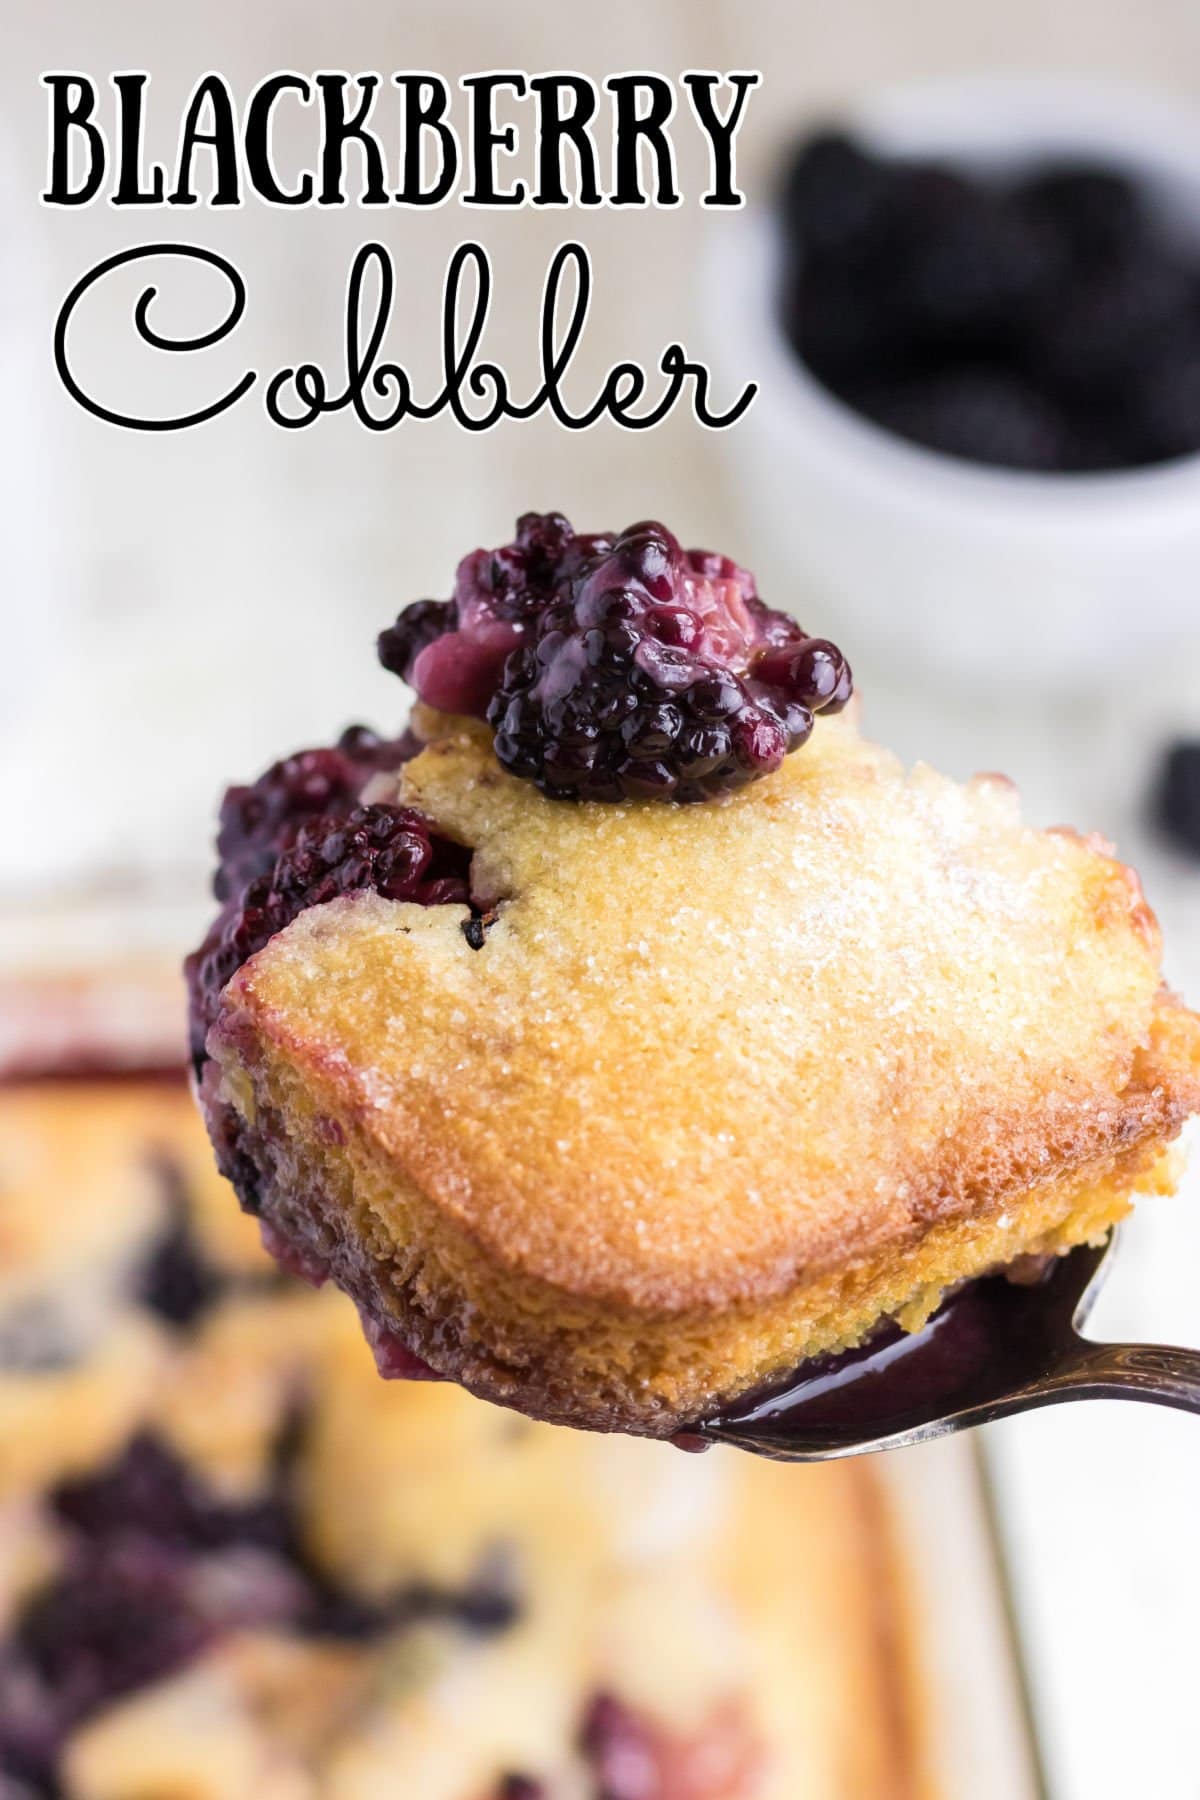 A spoonful of blackberry cobbler with a title text overlay.